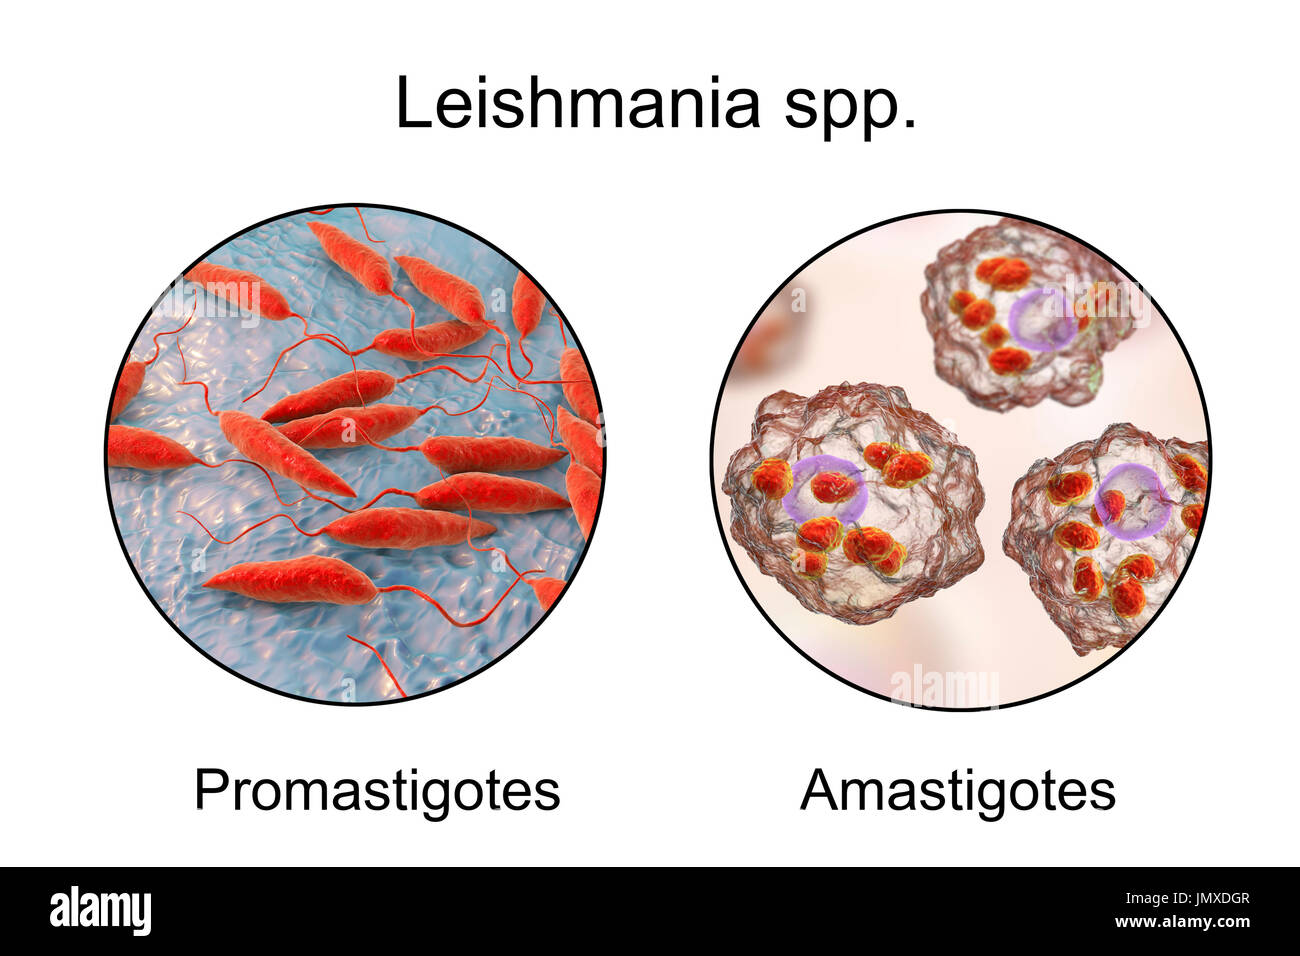 Promastigotes and amastigotes of Leishmania parasites inside macrophages, illustration. Leishmania sp. cause leishmaniosis, a tropical disease transmitted by bites from infected sand-flies. These are the flagellated promastigote form of the parasite. In humans the flagellated promastigotes stage infects macrophages and are transformed into the amastigote non-flagellated stage. There are two forms of leishmaniosis. The first, cutaneous leishmaniosis, affects the skin giving rise to an ulcer at the site of the bite. This mainly heals naturally, although scarring may occur. The more serious, Stock Photo